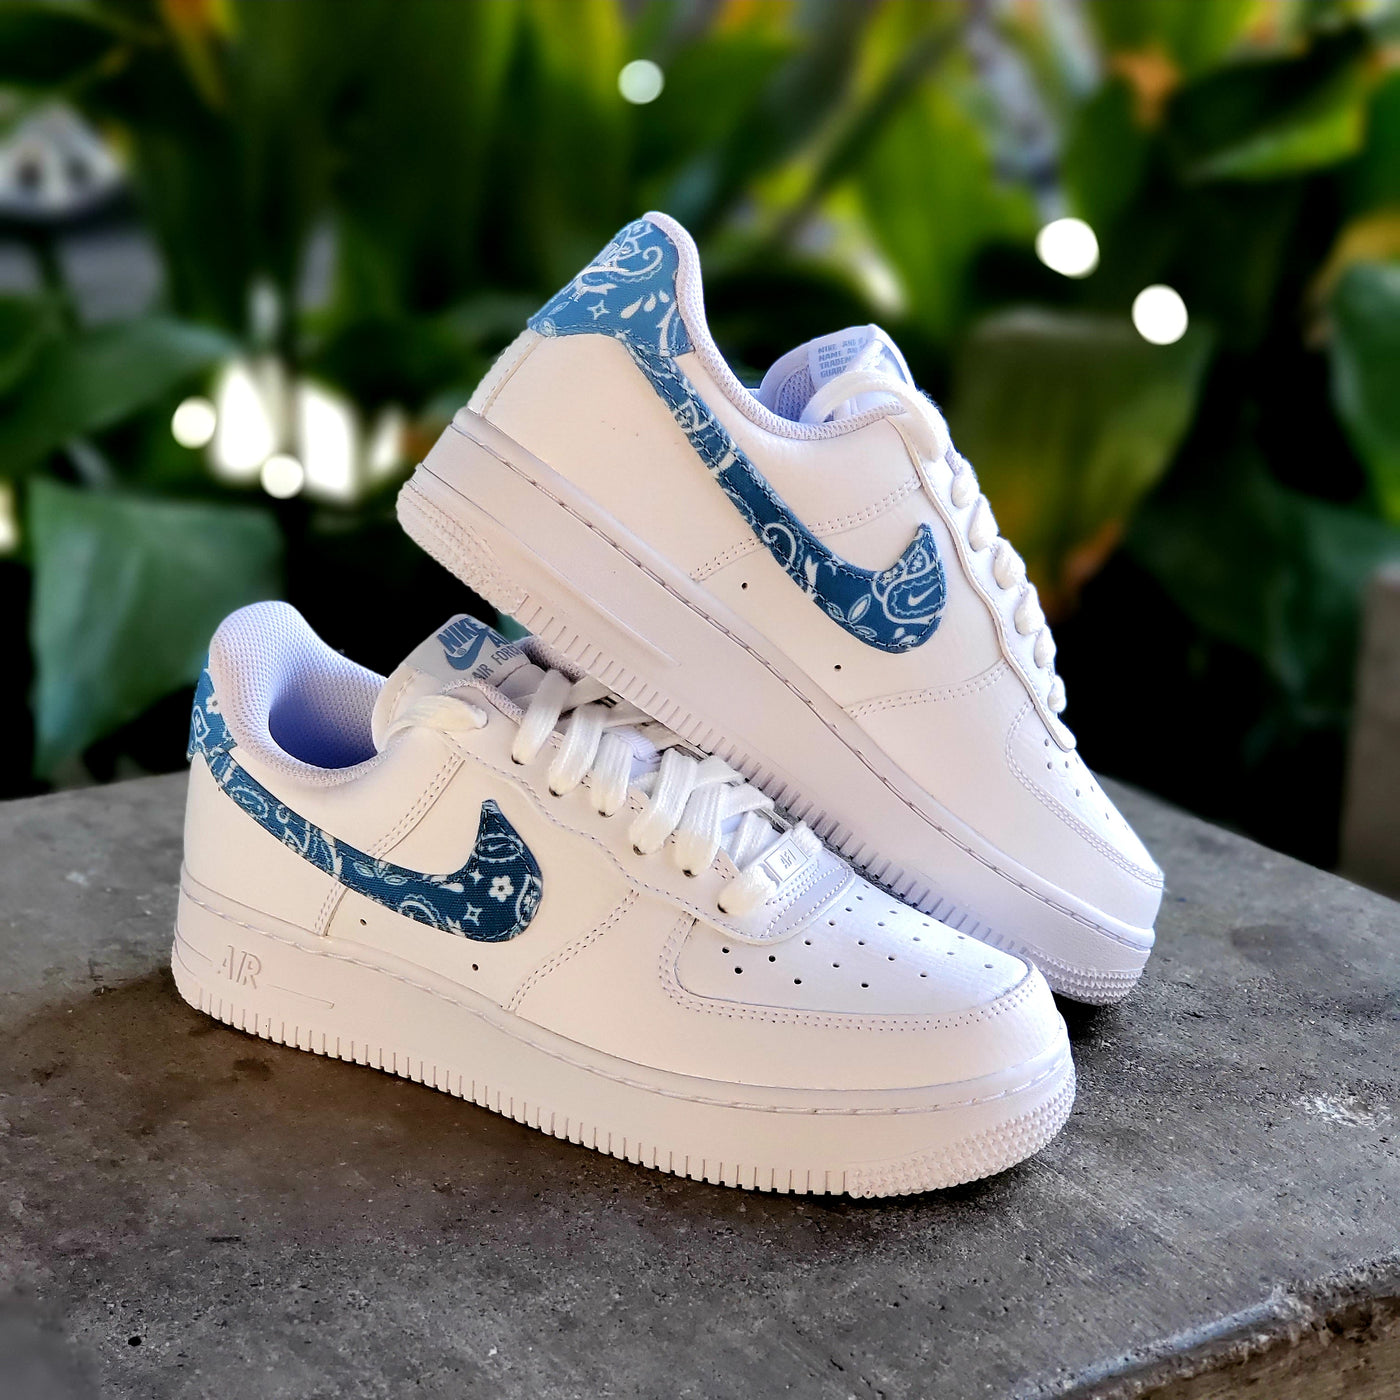 New Nike Air Force 1 Low Women's Size 10 / 8.5 Men White Blue Paisley  DH4406-100